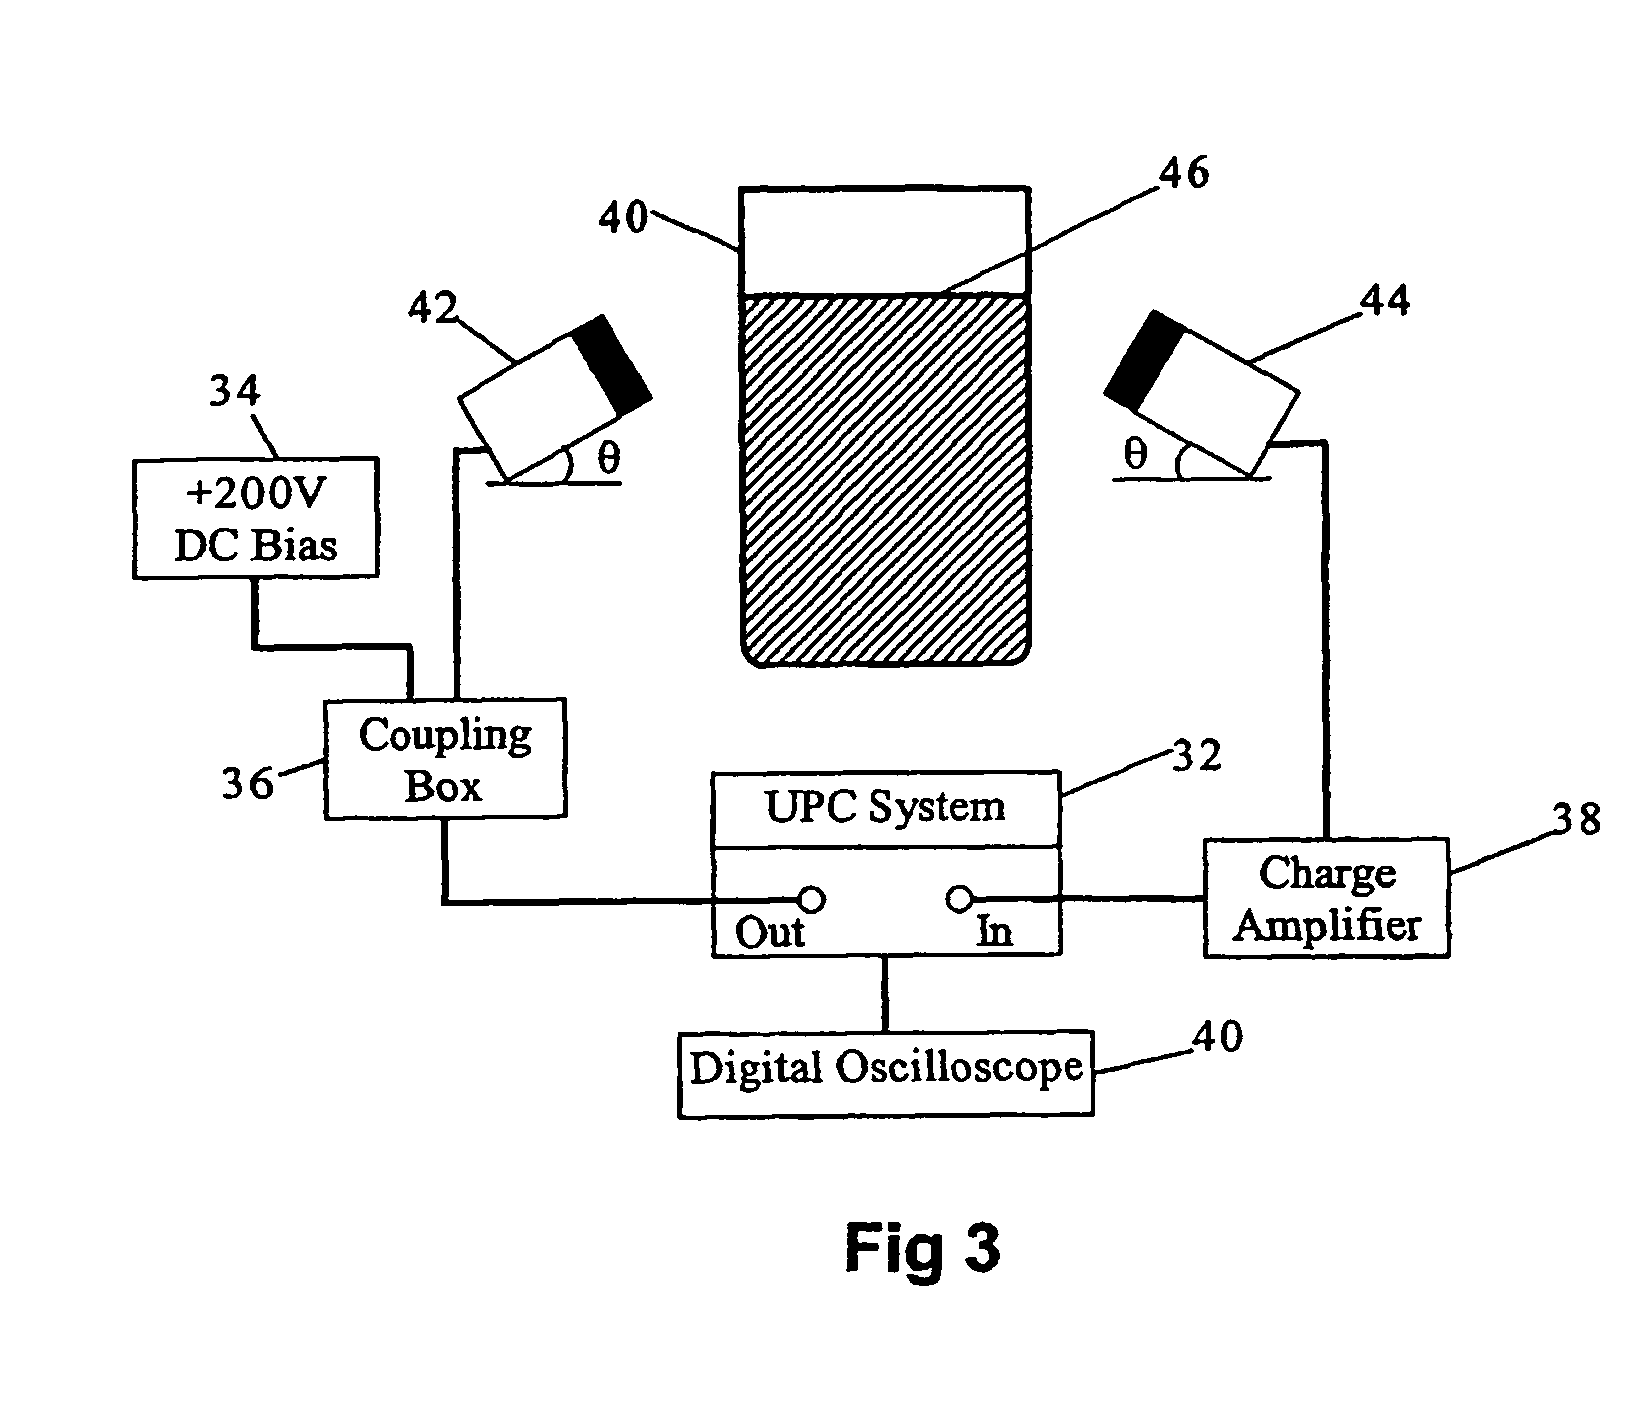 Method of inspecting food stuffs and/or associated packaging